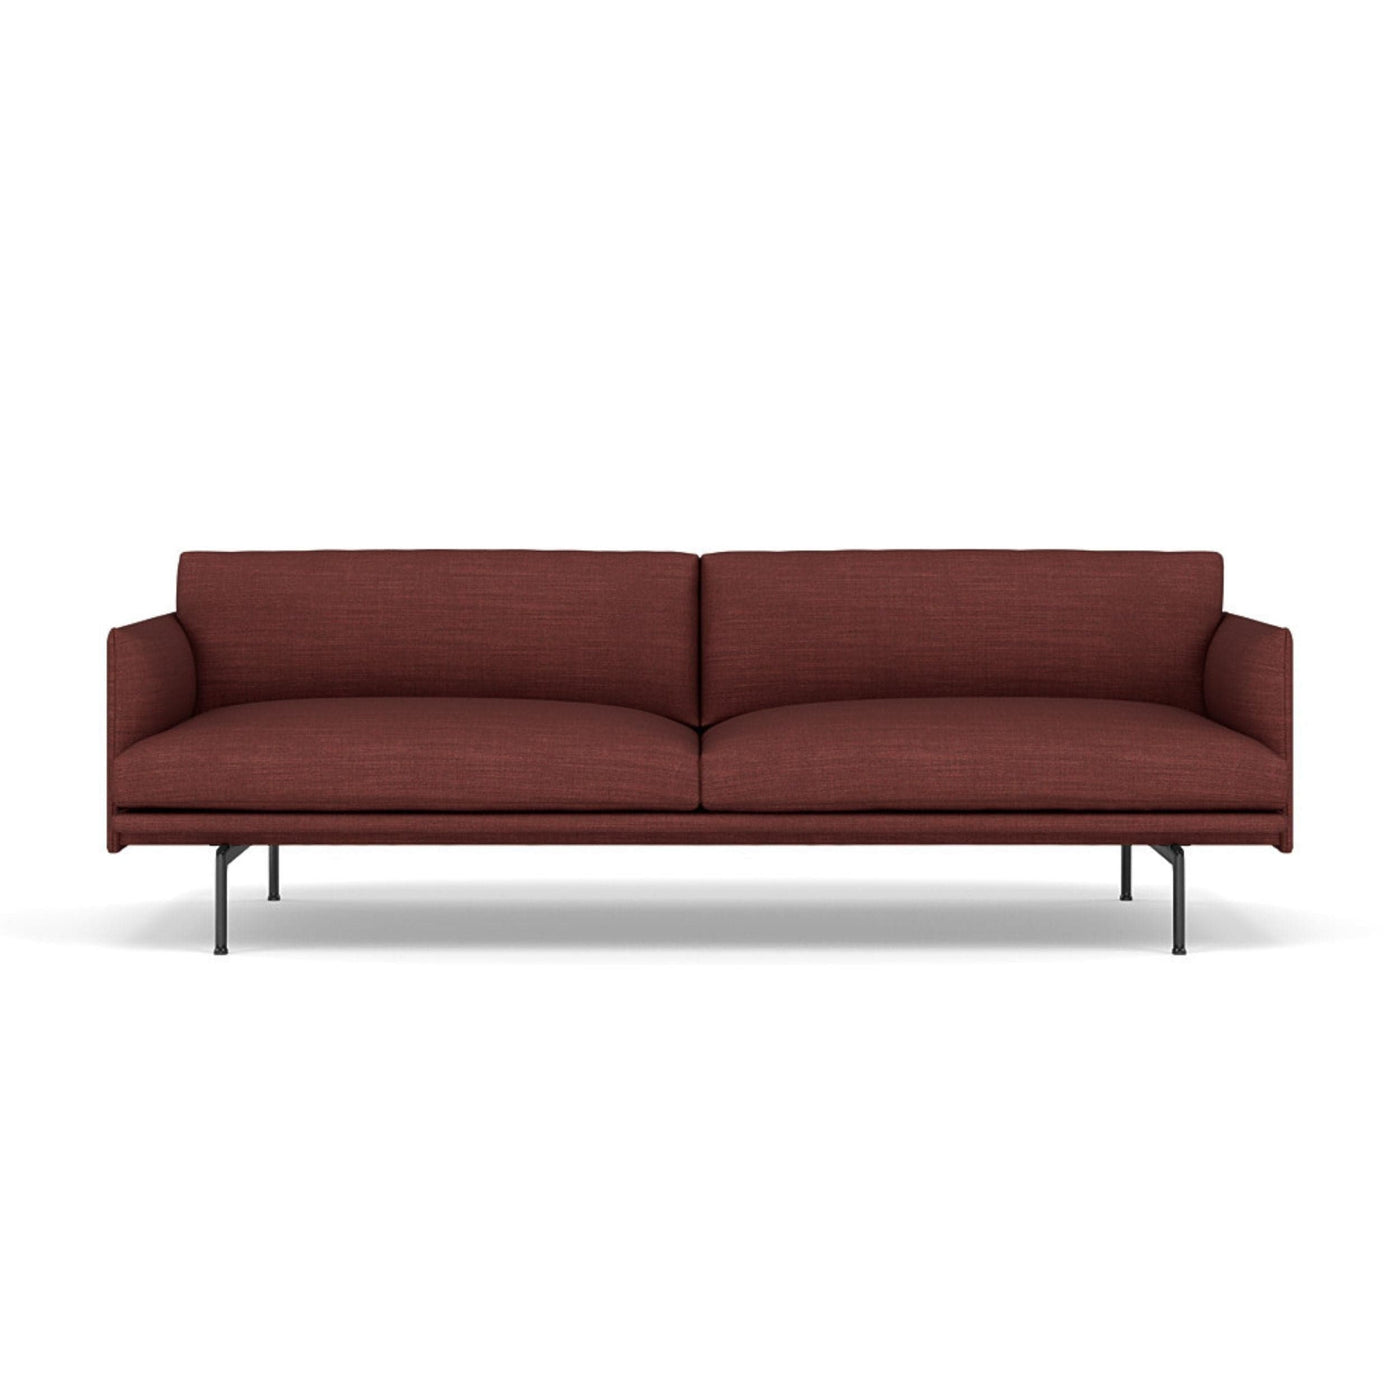 Muuto outline 3 seater sofa with black legs. Made to order from someday designs #colour_canvas-576-red